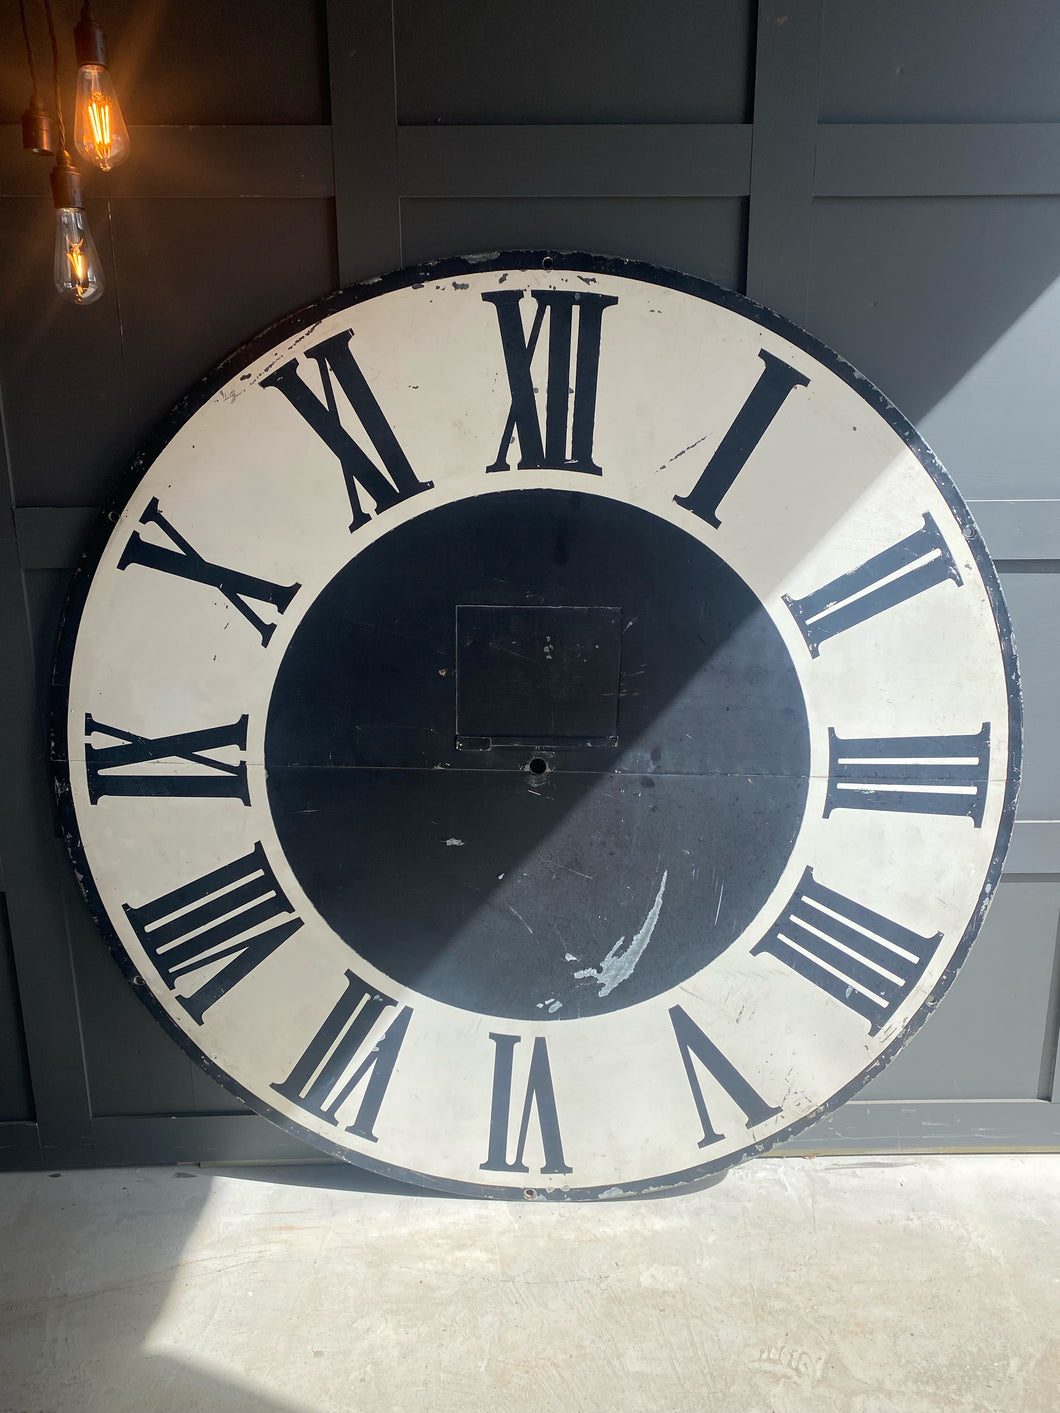 French antique clock face